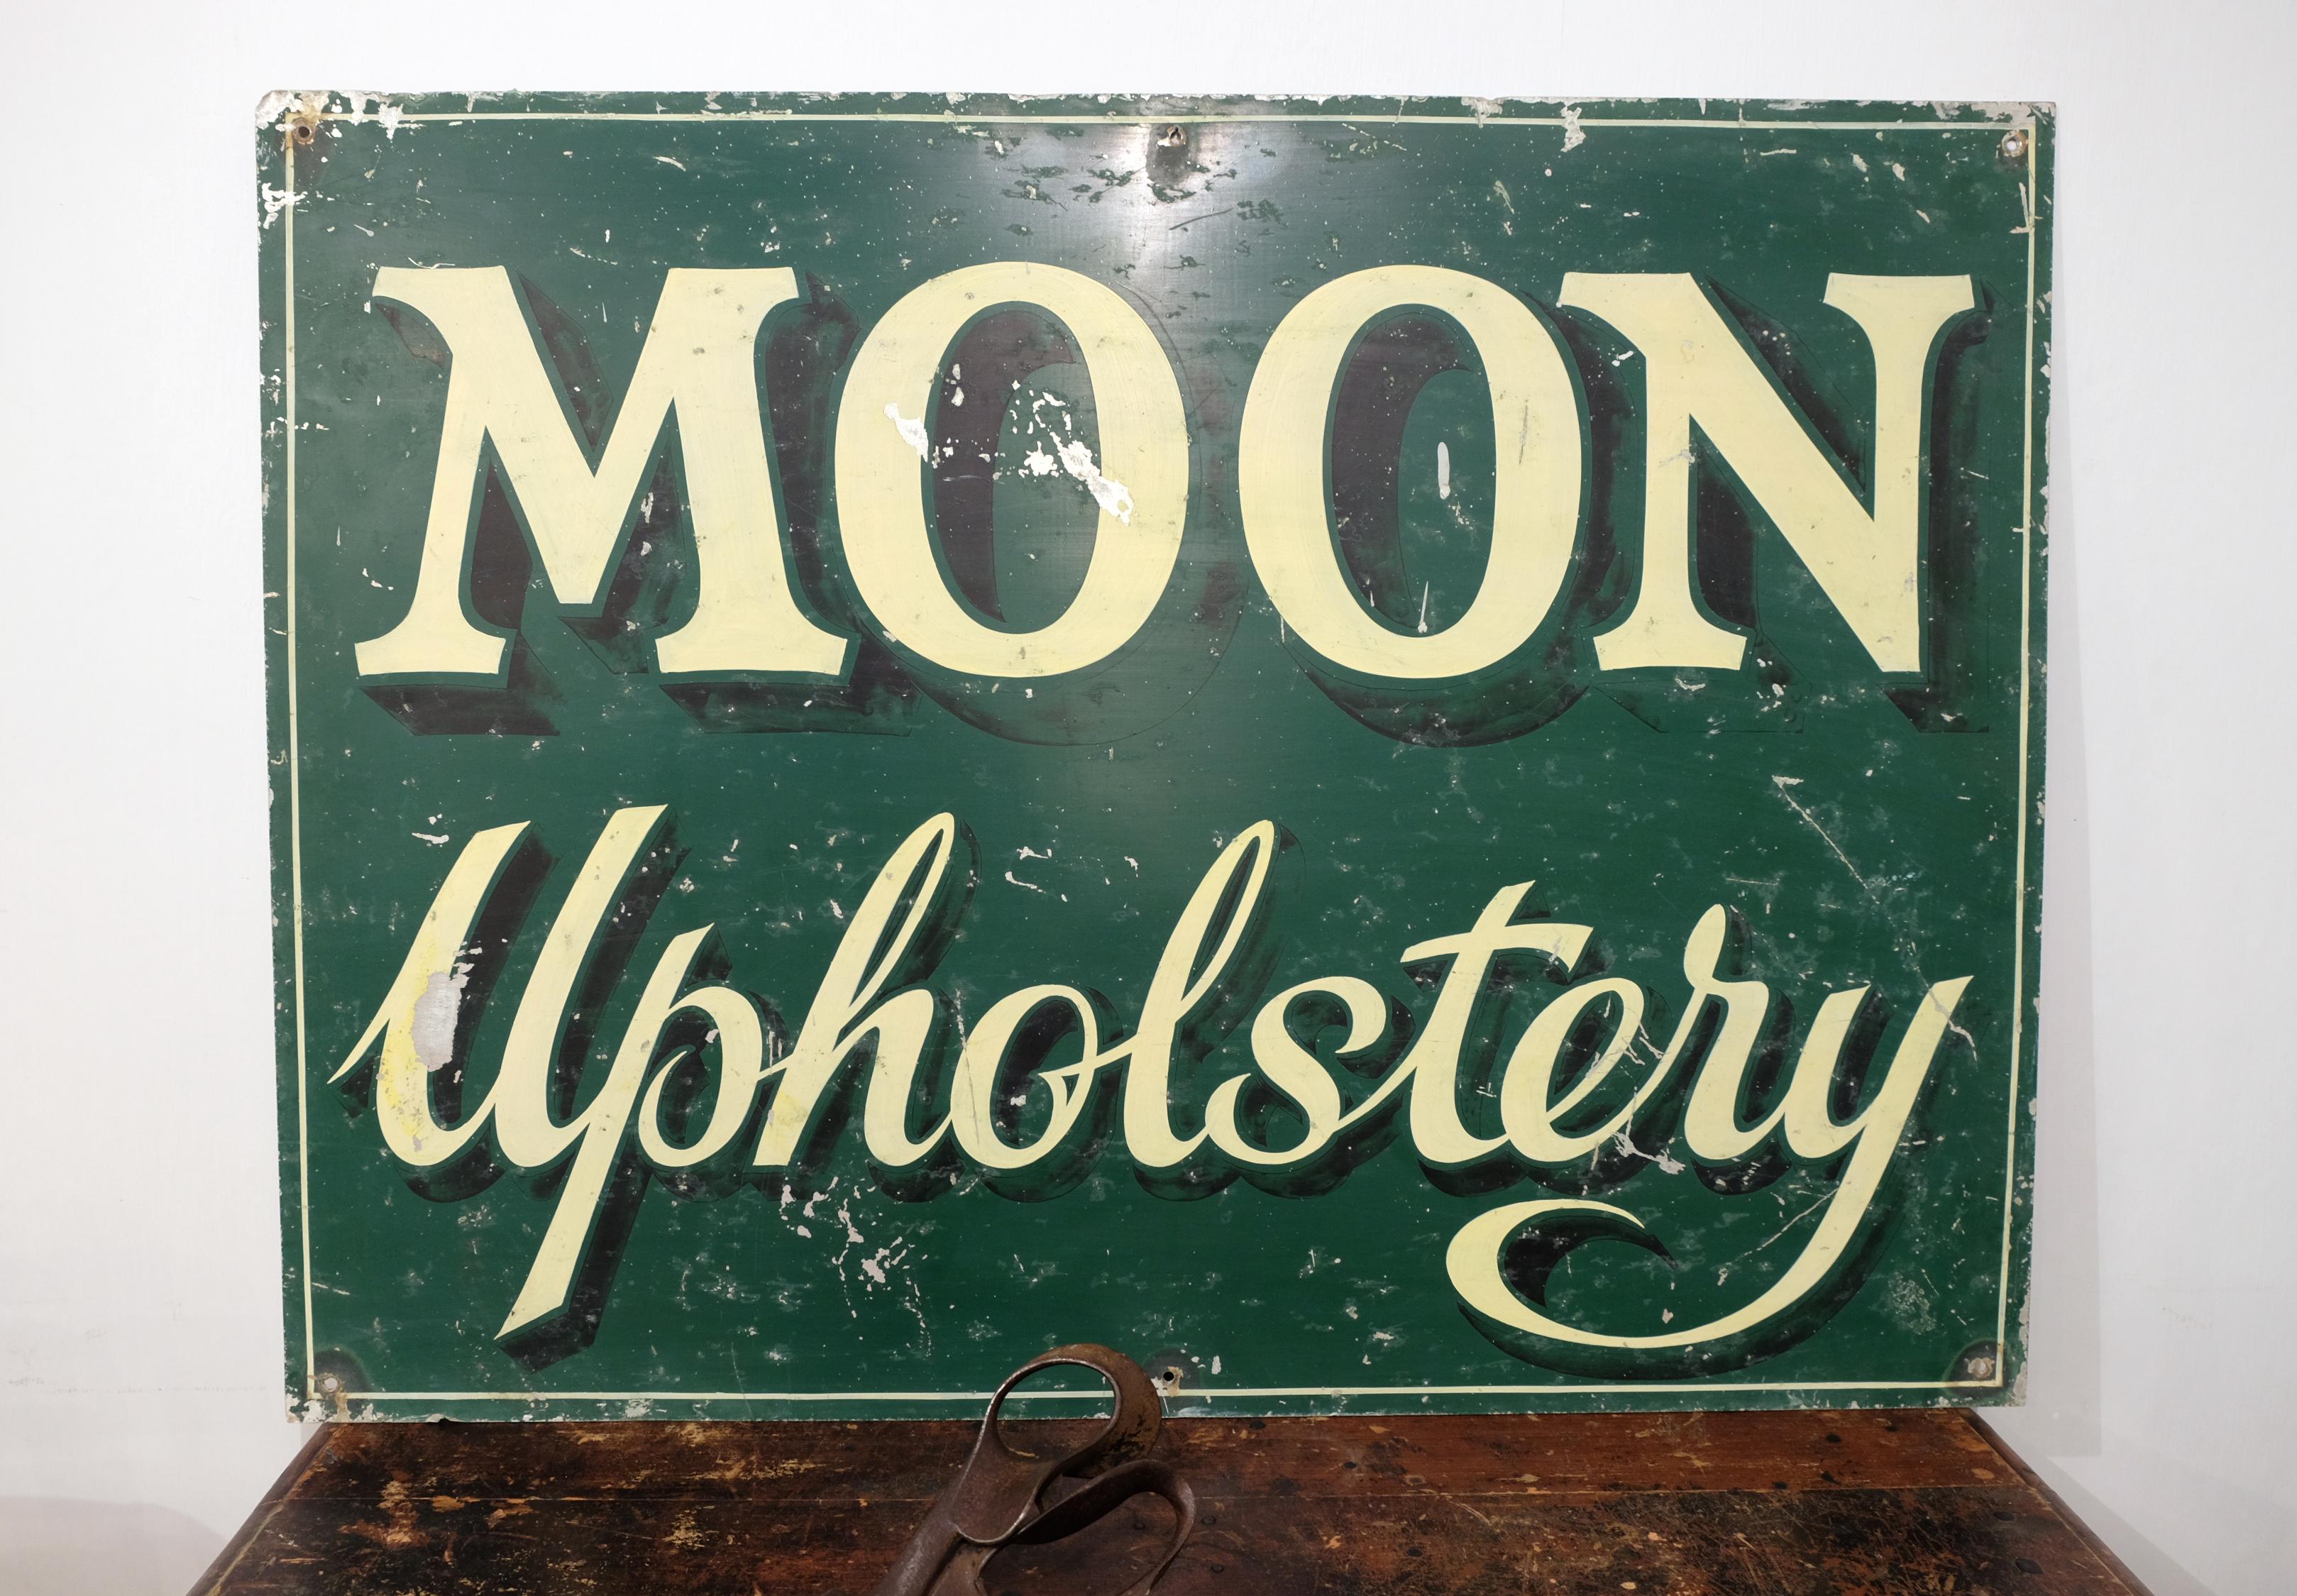 Hand-Painted Mid-20th Century Hand Painted Metal Trade Sign, Cream on Green 'Moon Upholstery'